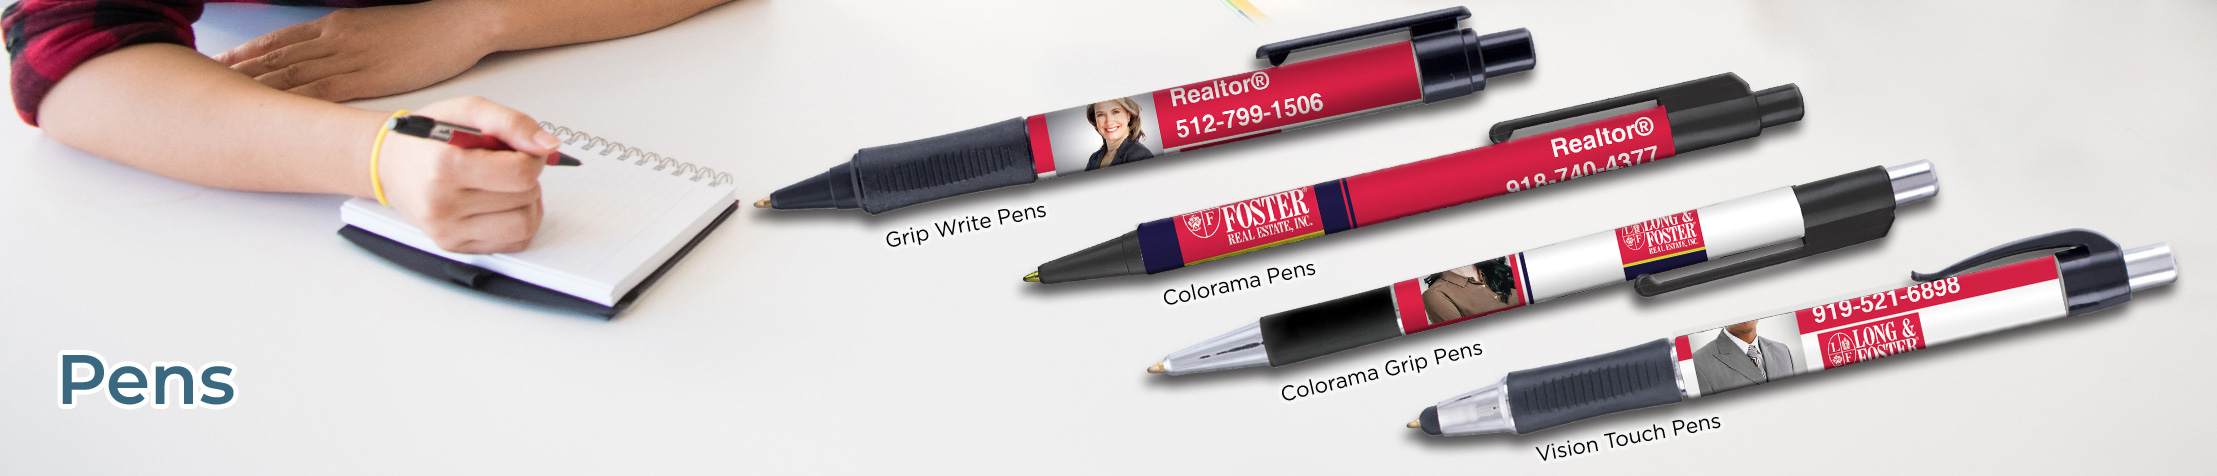 Long & Foster Real Estate Personalized Pens - promotional products: Grip Write Pens, Colorama Pens, Vision Touch Pens, and Colorama Grip Pens | BestPrintBuy.com